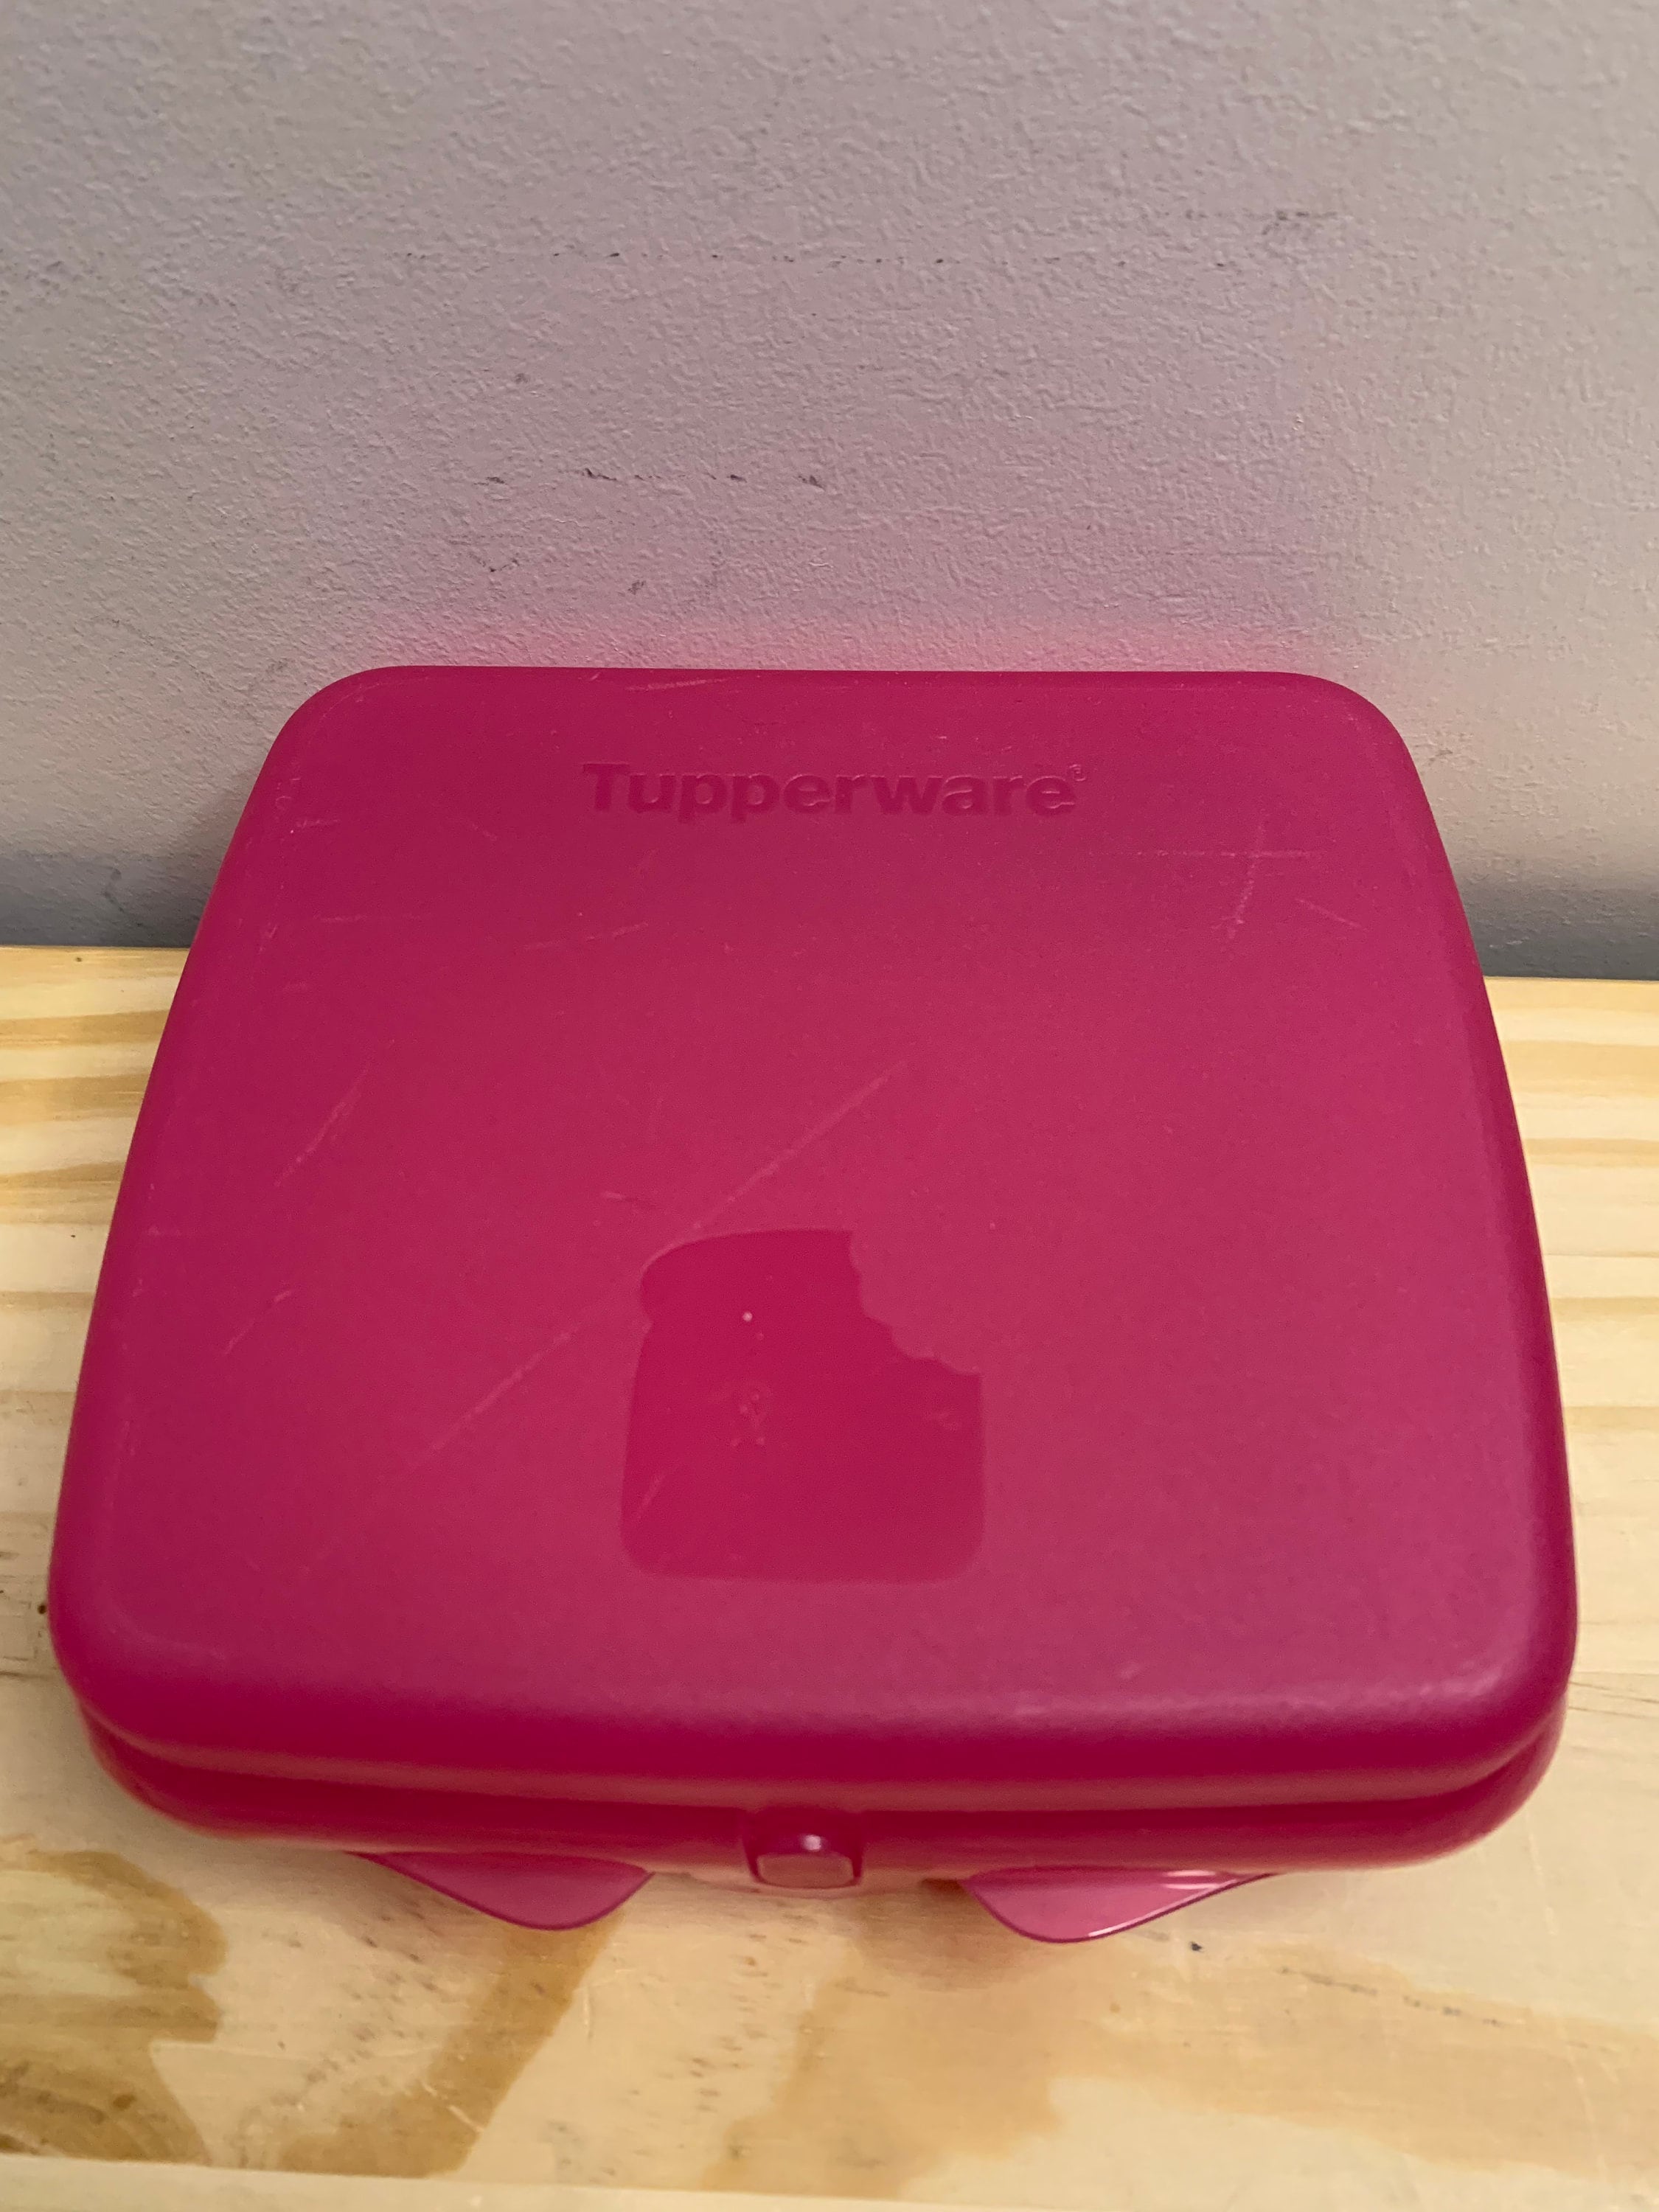  Tupperware Sandwich Keeper Square Hinged and Locking Box Pink :  Home & Kitchen